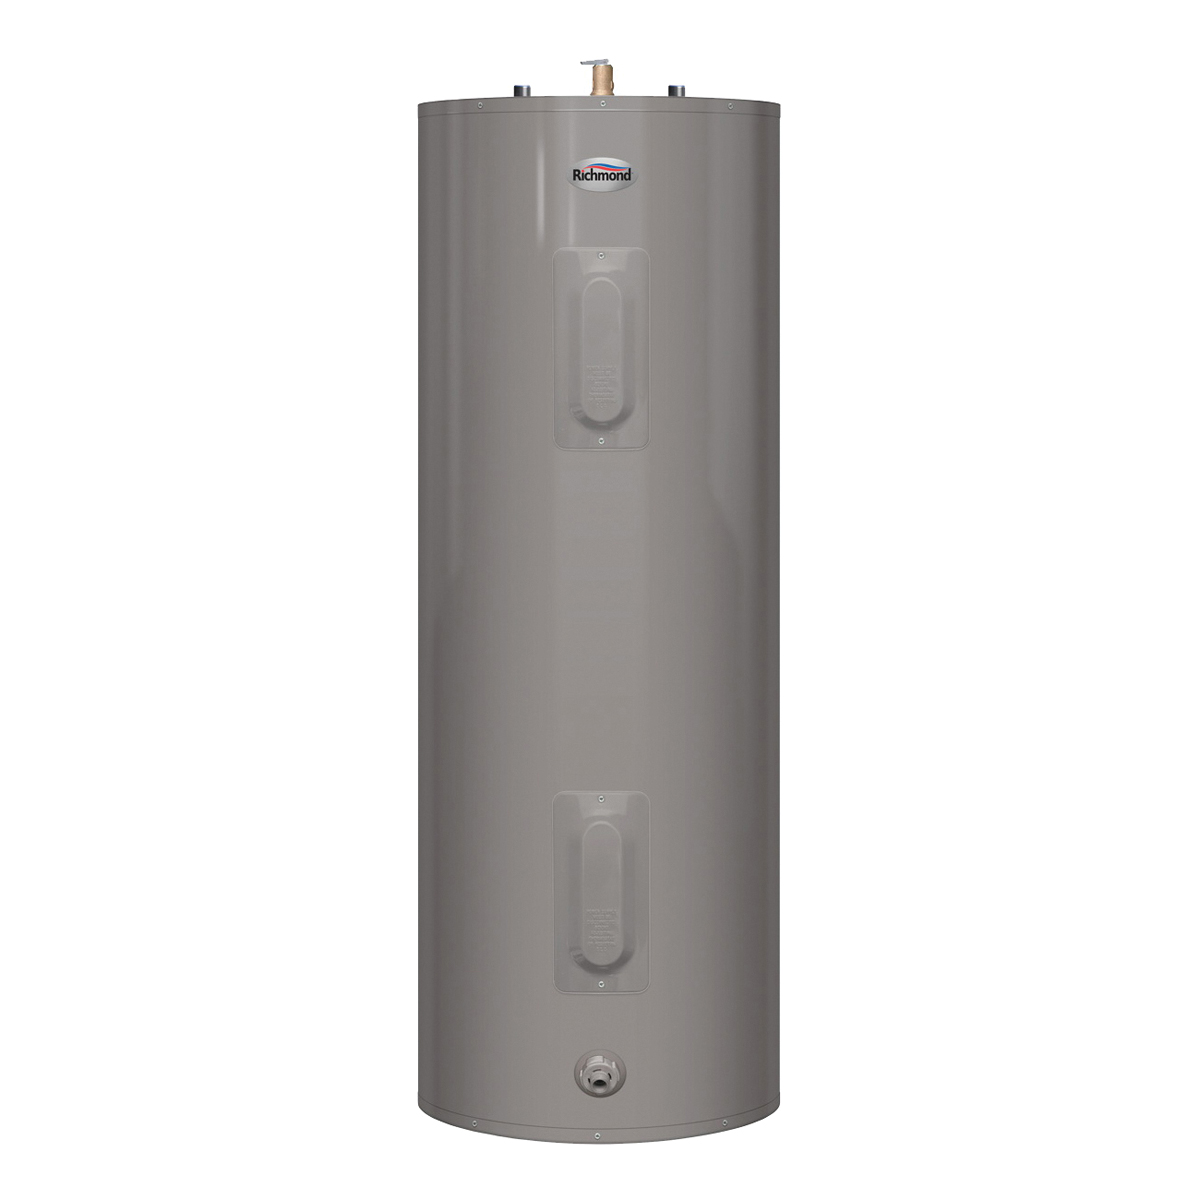 Essential Series 6E40-D Electric Water Heater, 240 V, 4500 W, 40 gal Tank, 0.93 Energy Efficiency